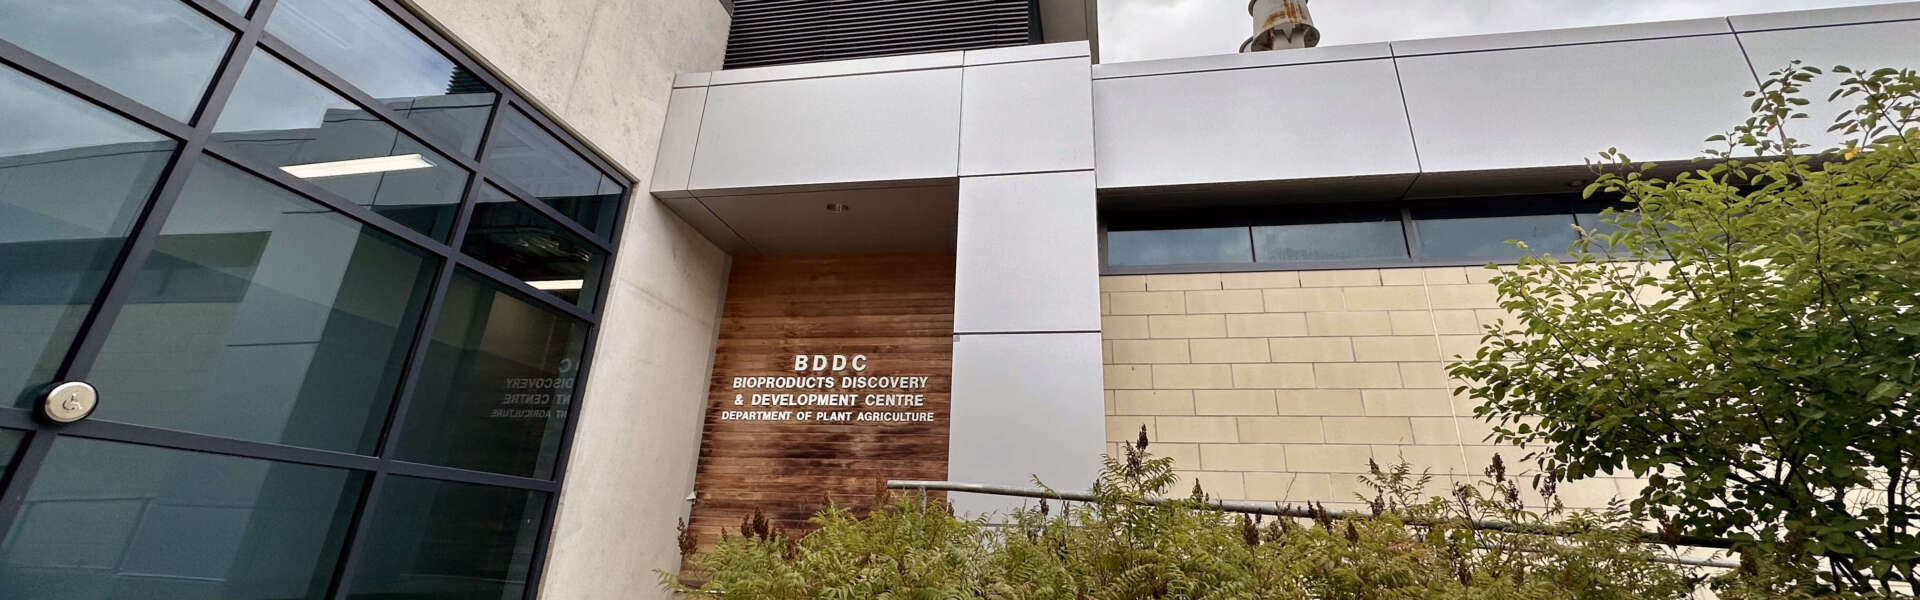 The exterior of the BDDC building, with large glass windows and metal-on-wood sign on with bushes in the foreground